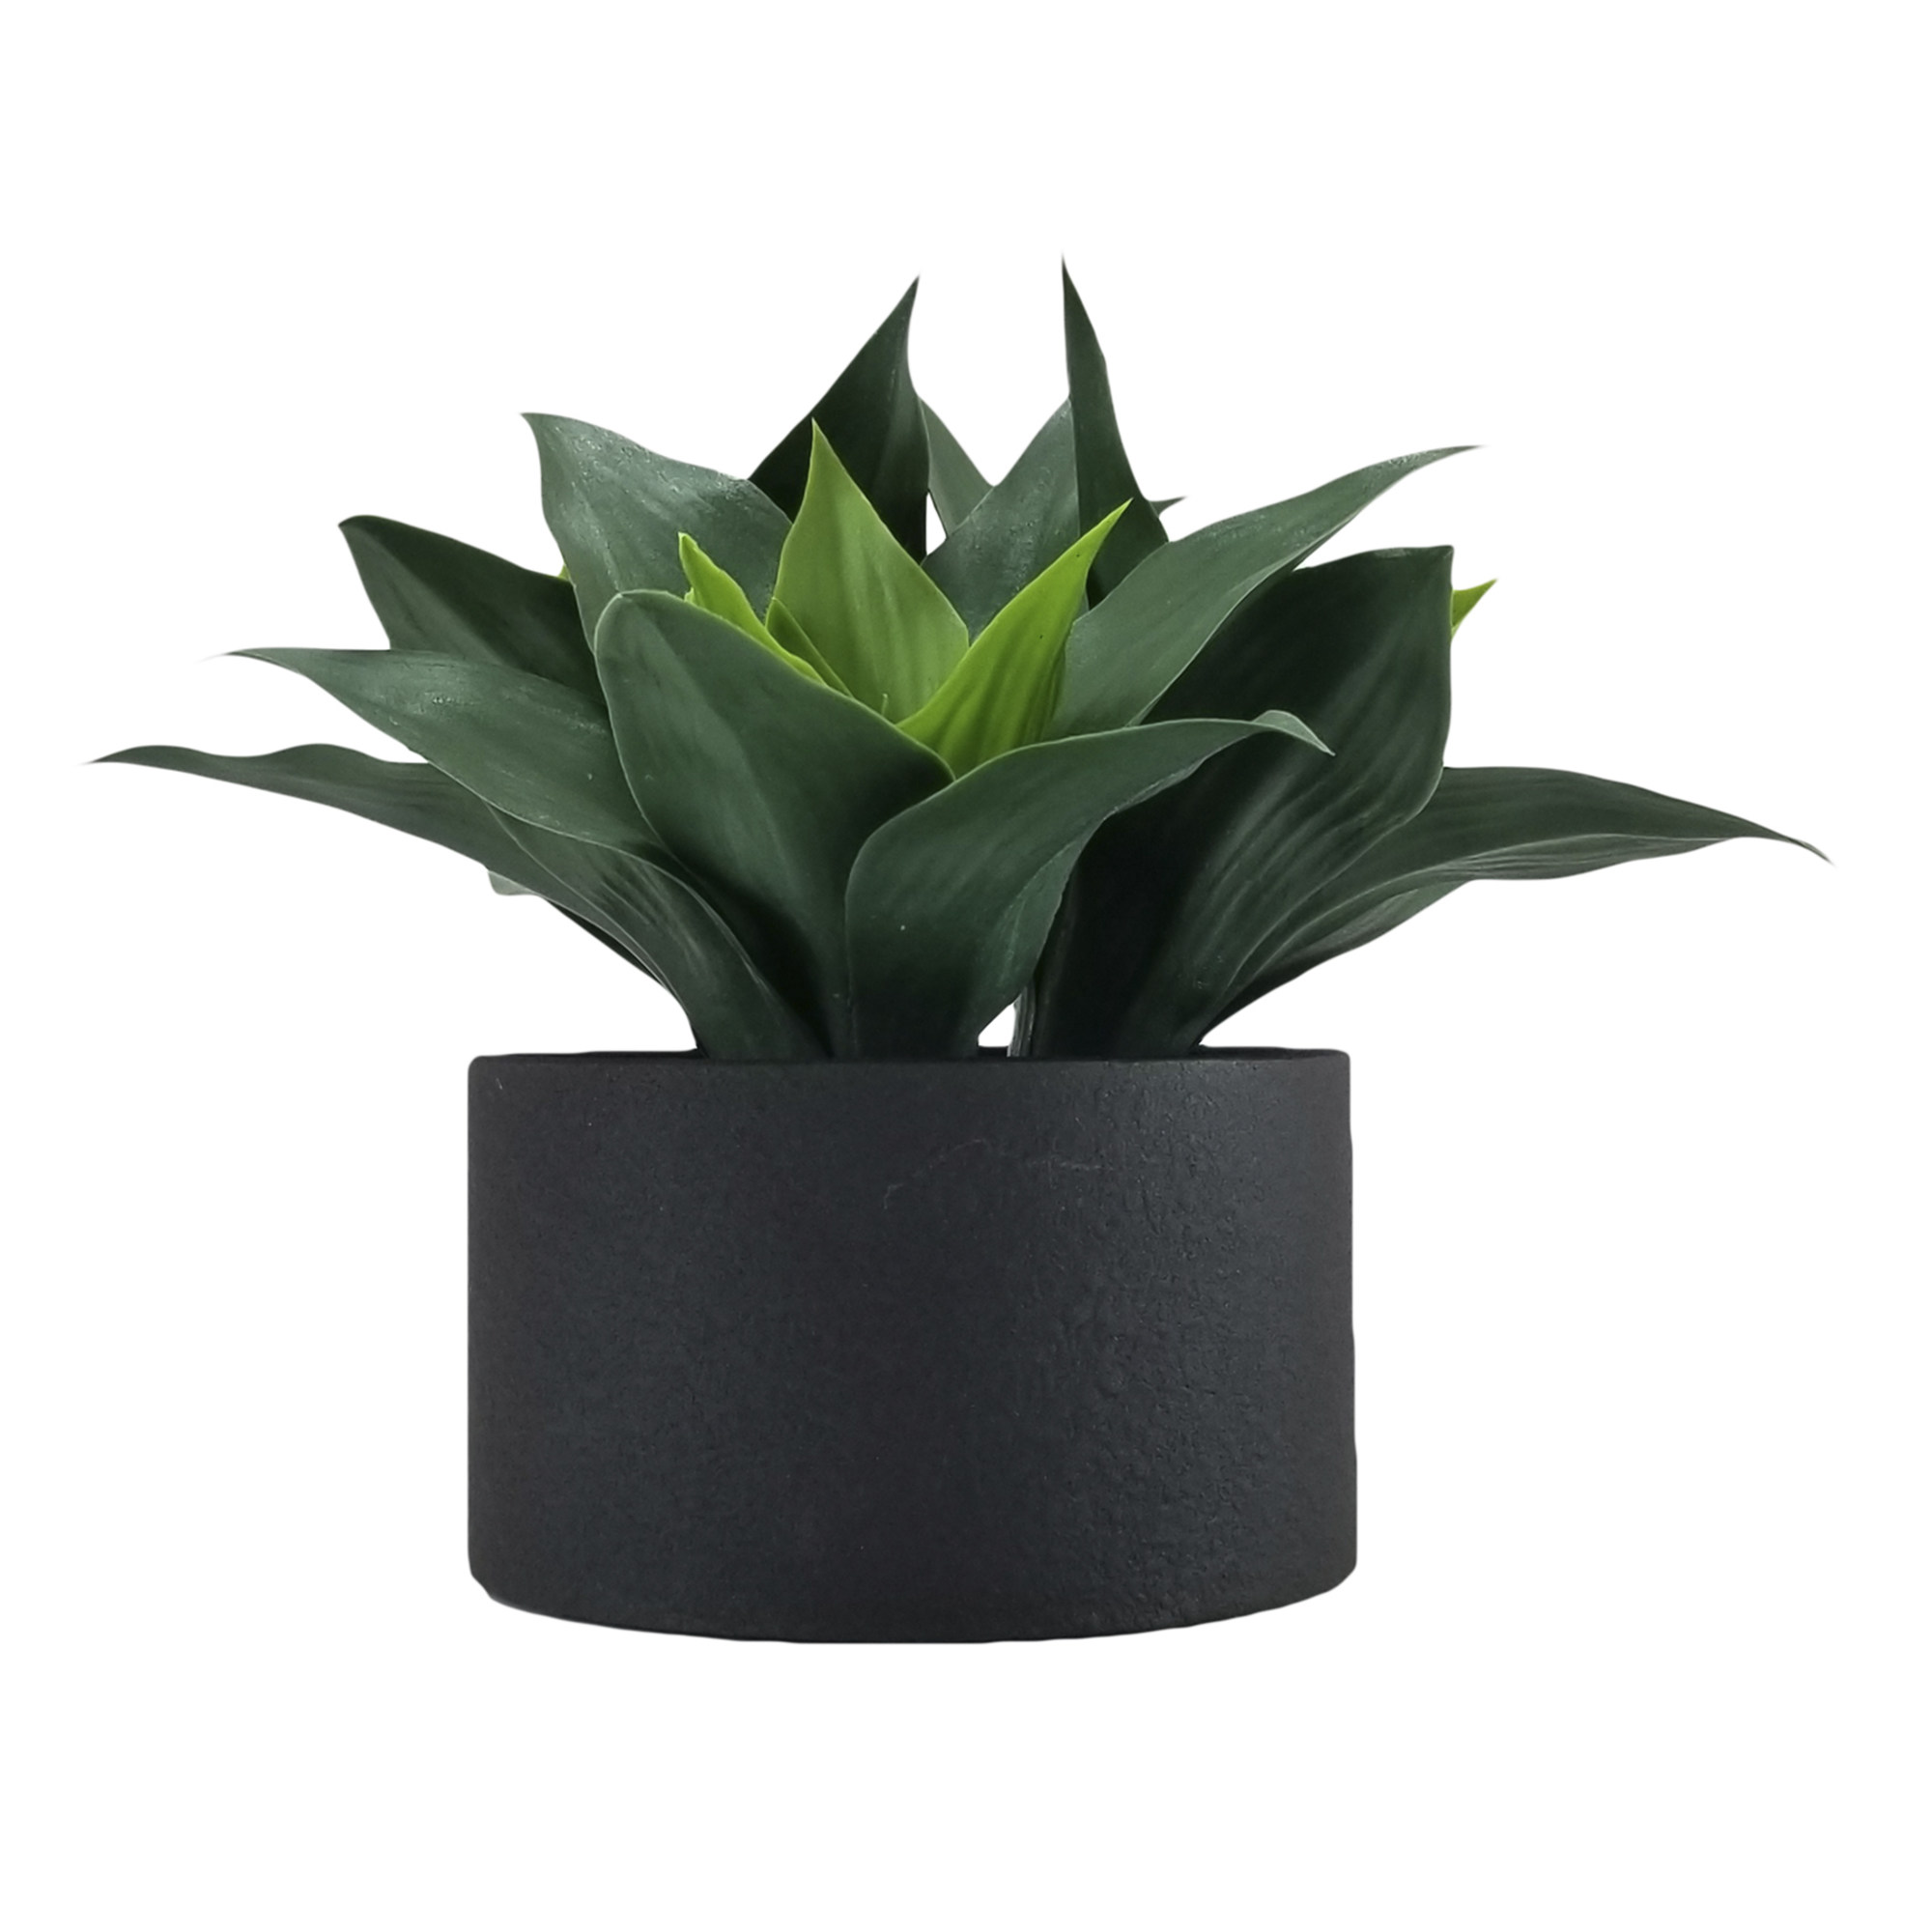 9.25" Artificial Agave Plant in Black Metal Pot by Better Homes & Gardens - image 1 of 10